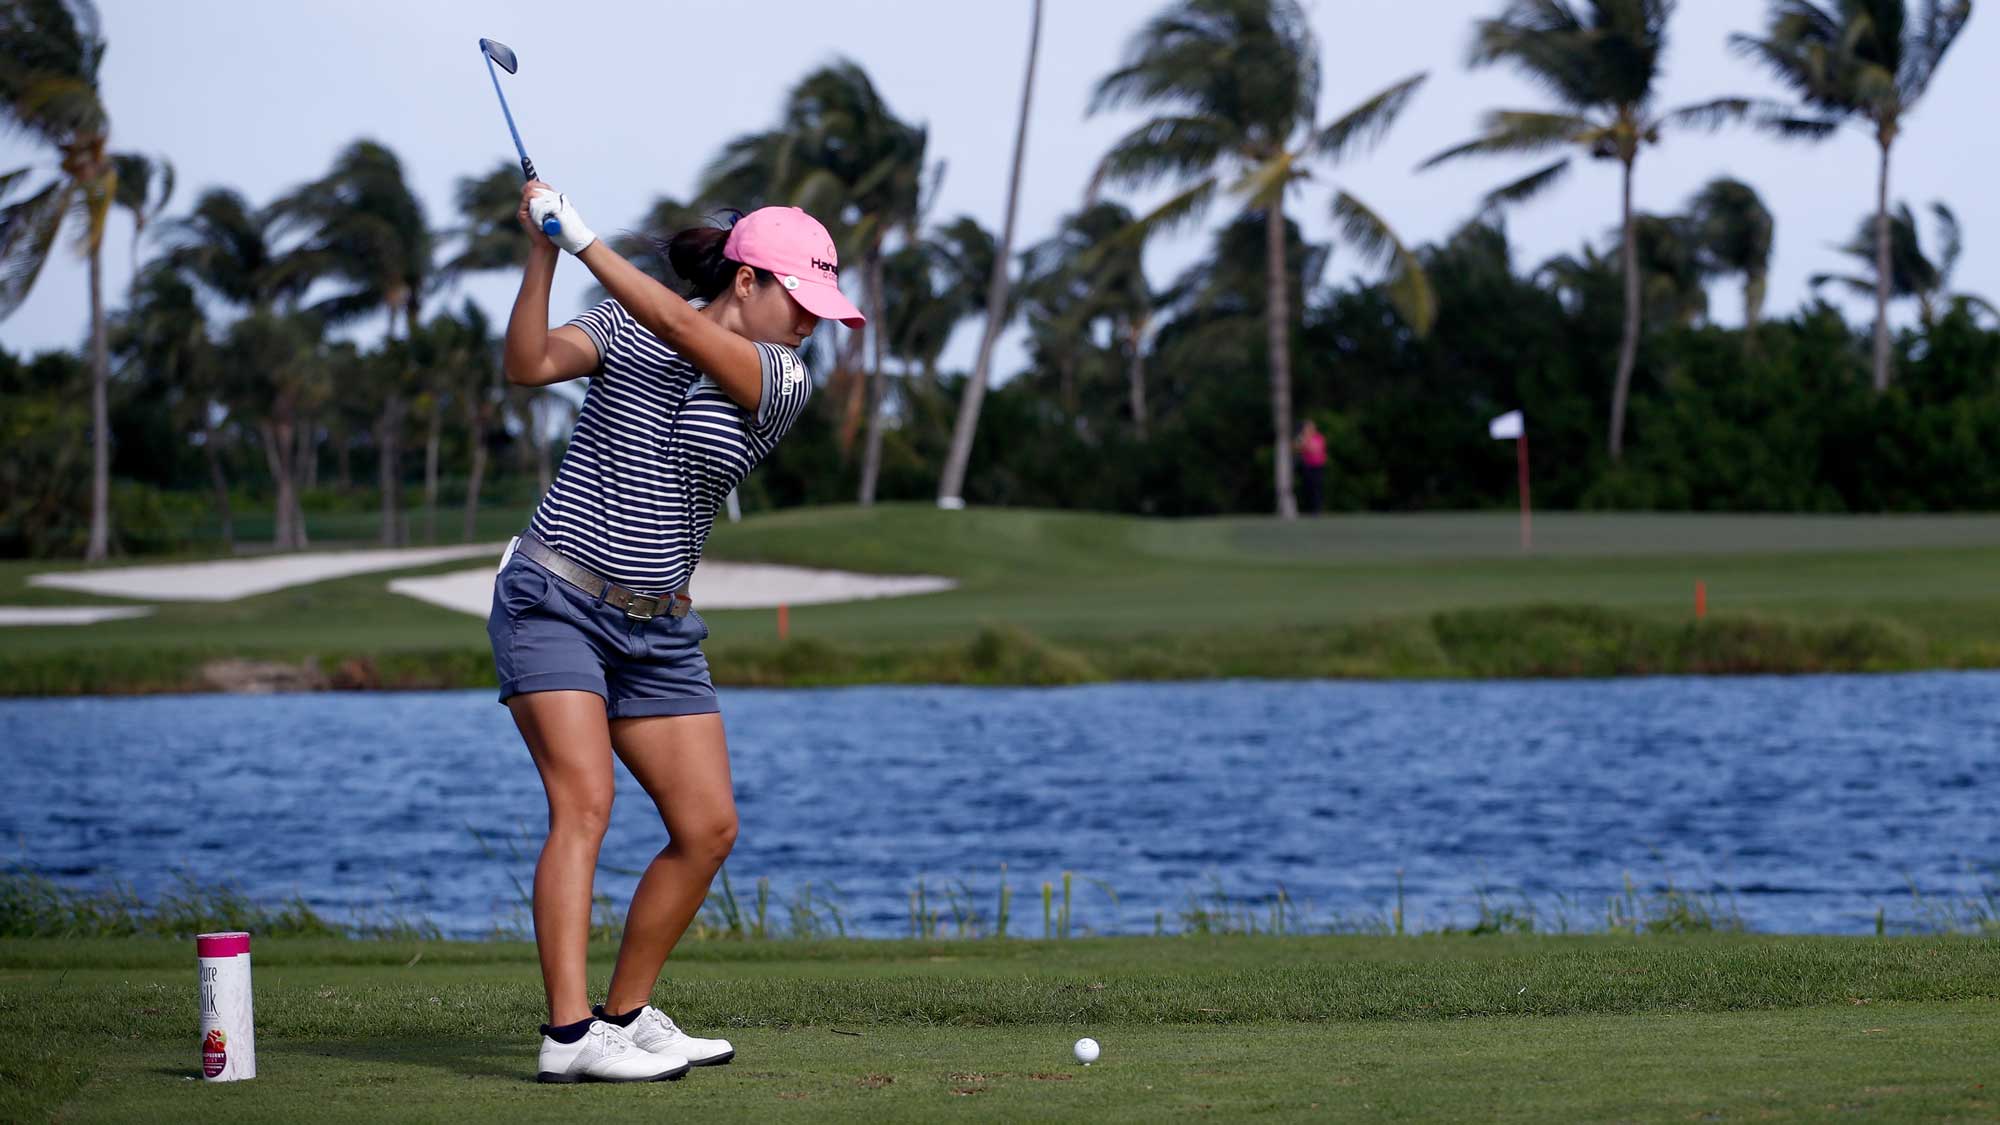 In-Kyung Kim of the Republic of Korea hits her tee shot on the third hole during the second round of the Pure Silk Bahamas LPGA Classic